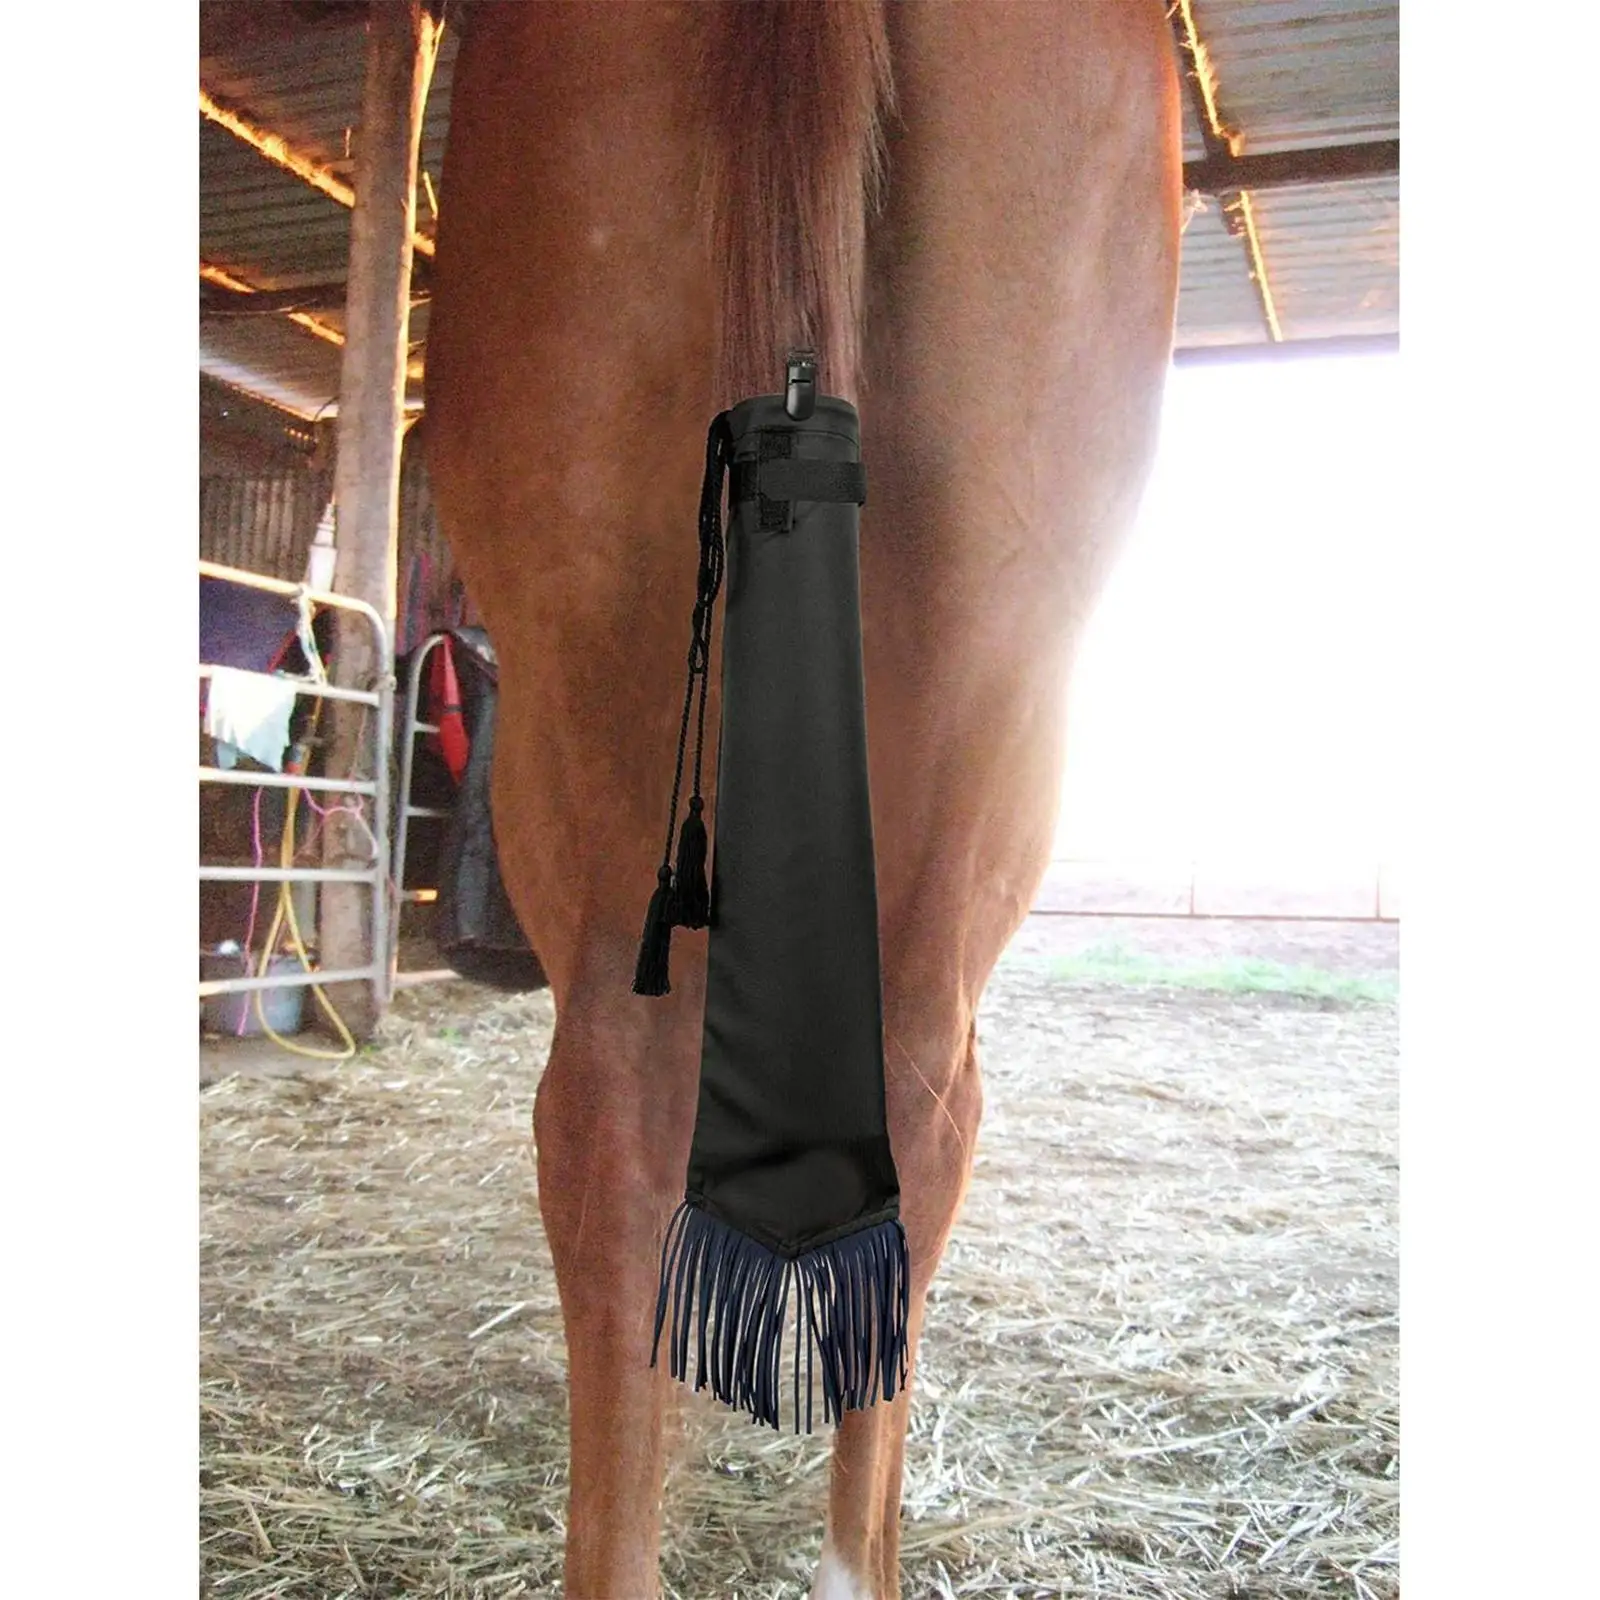 Horse Tail Bag Nylon with Fringe Protector Protect Tail for Horses Supplies